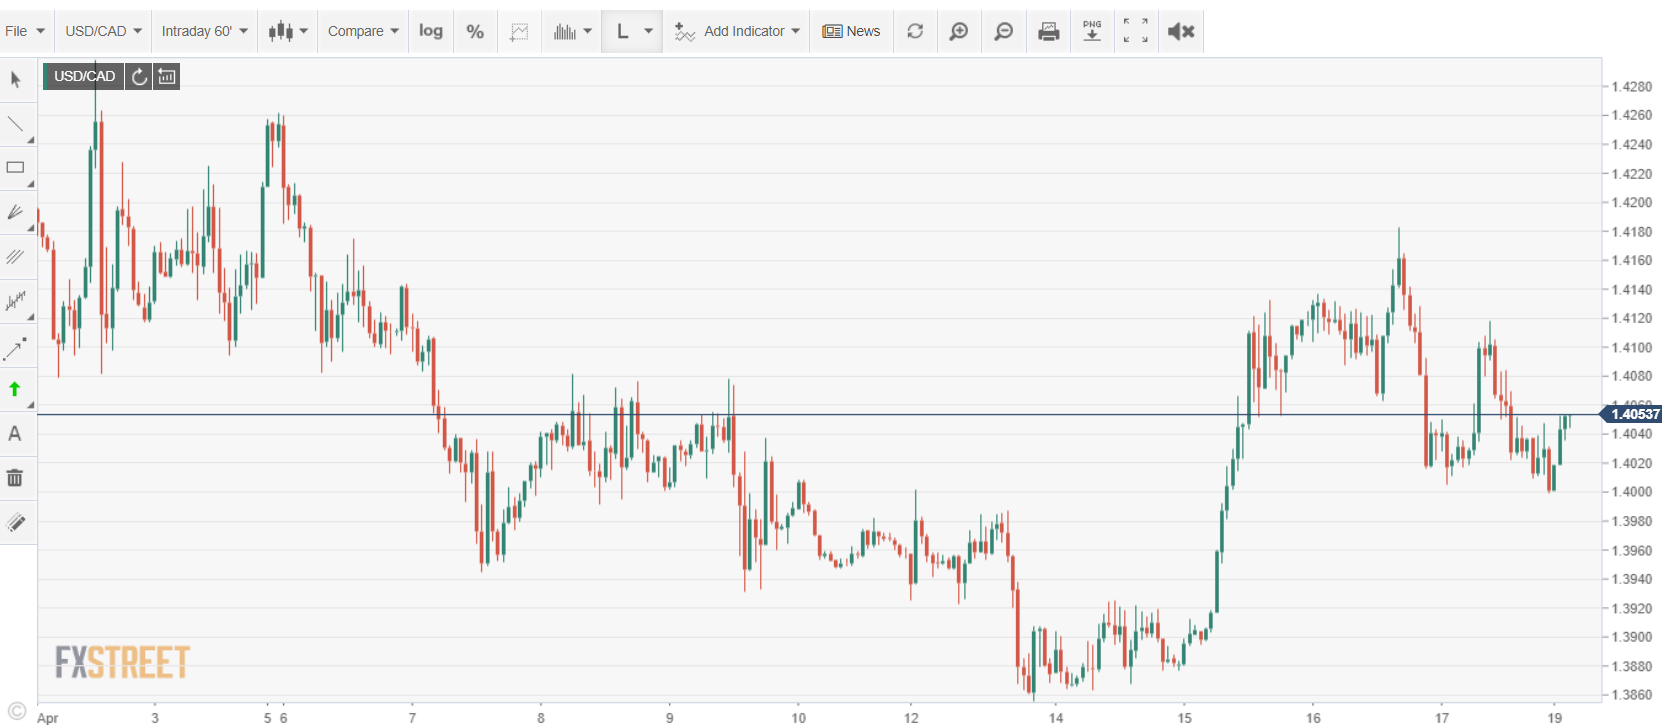 FX Street USDCAD Intraday Chart - 20 April 2020